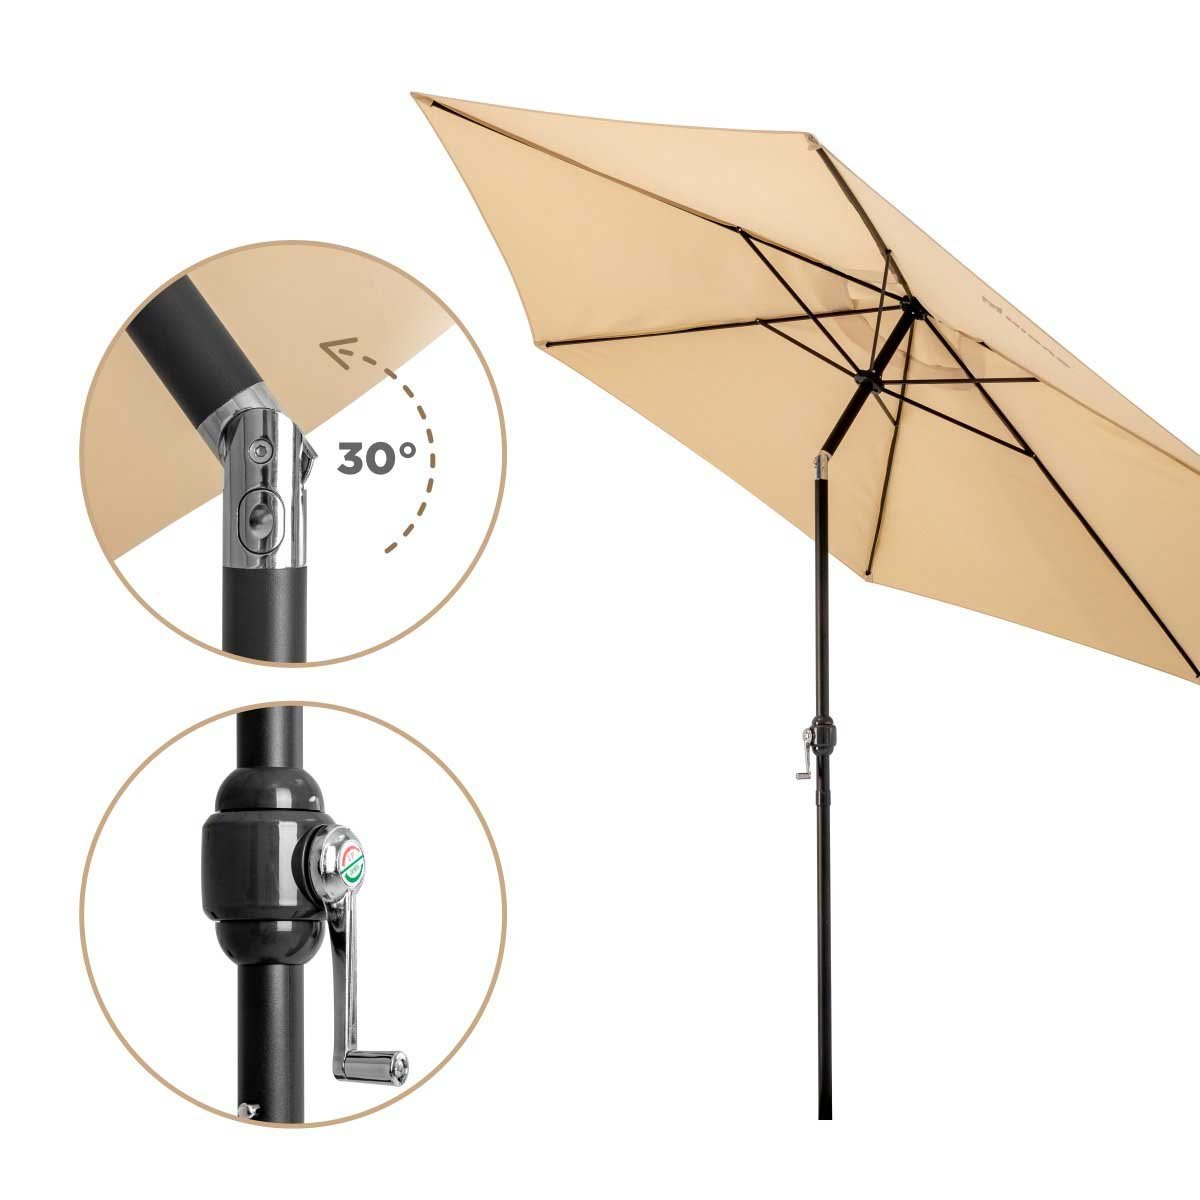 Patio Garden Large Folding Tilting Umbrella is boasting a 30 degree inclining angle, regulating with a configure handle 